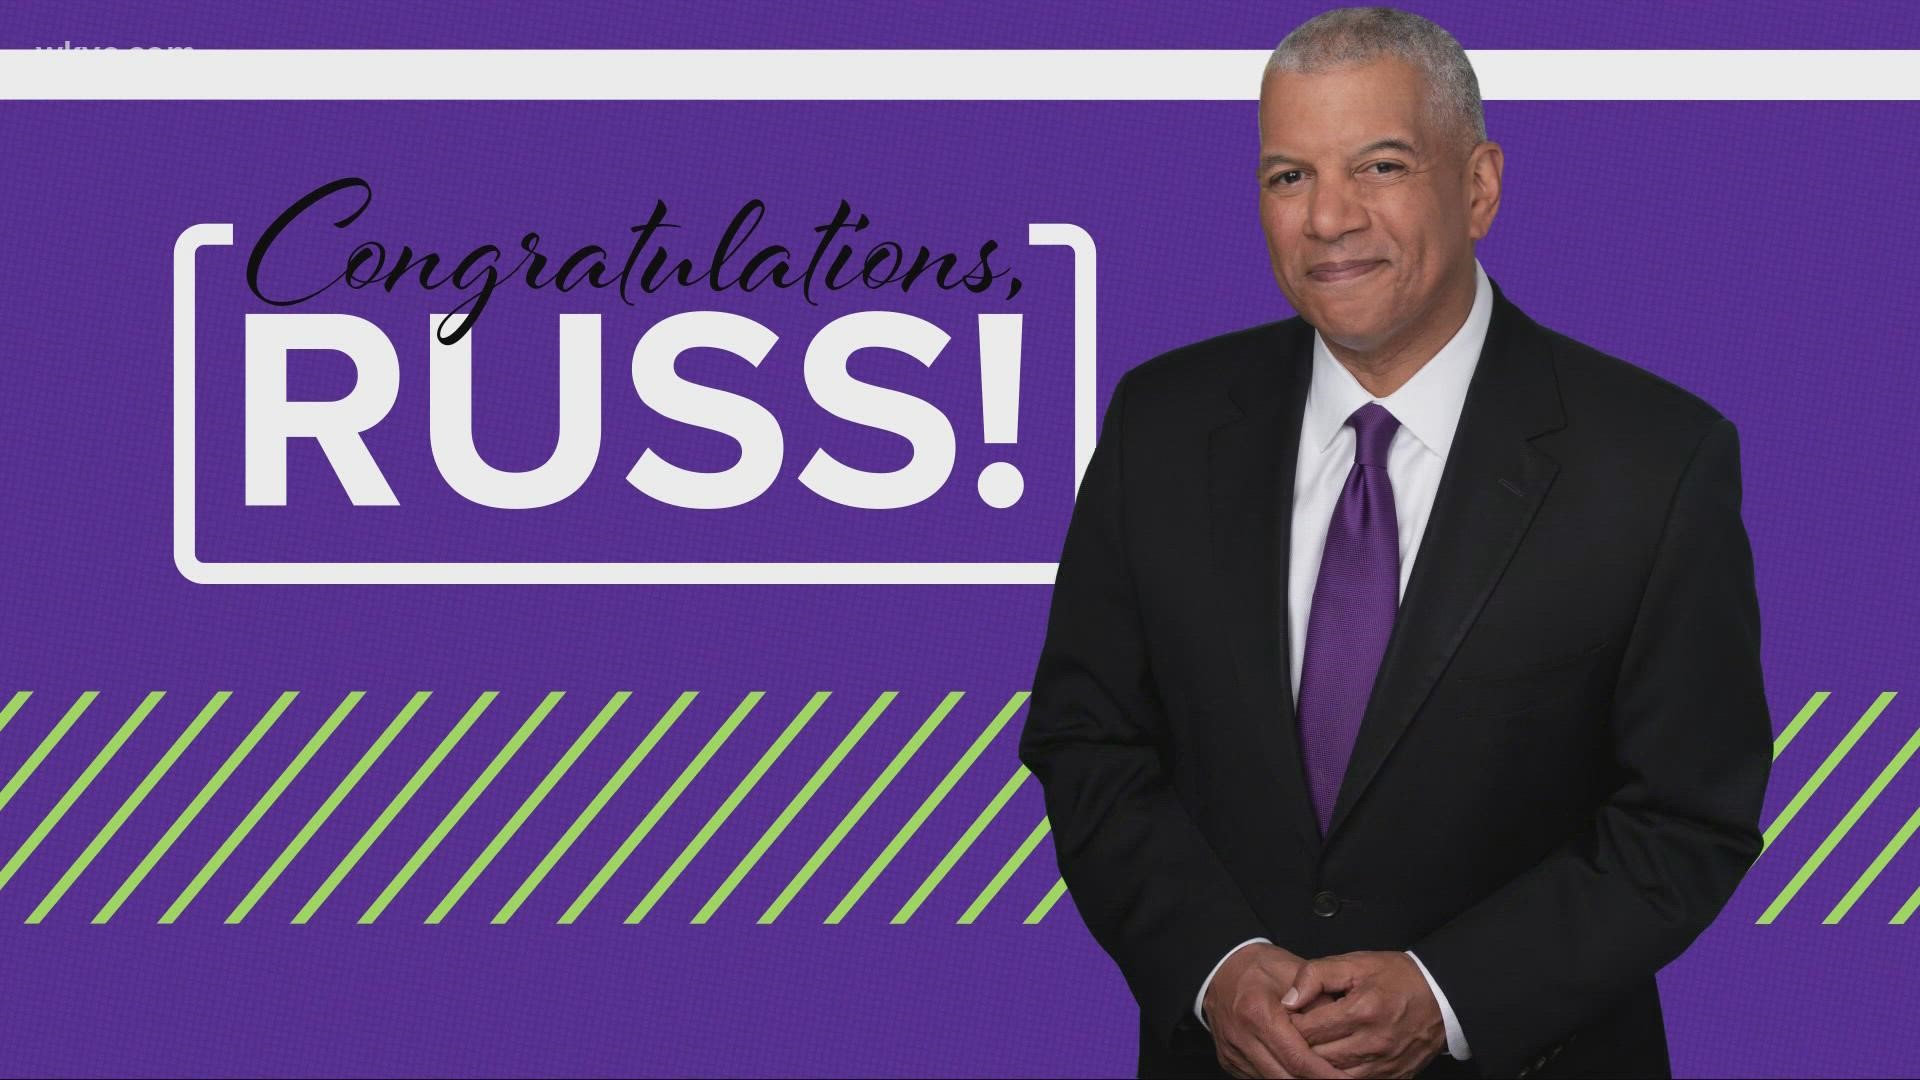 We are taking a little time out to celebrate our very own, Russ Mitchell -- and his 10 years here at WKYC.